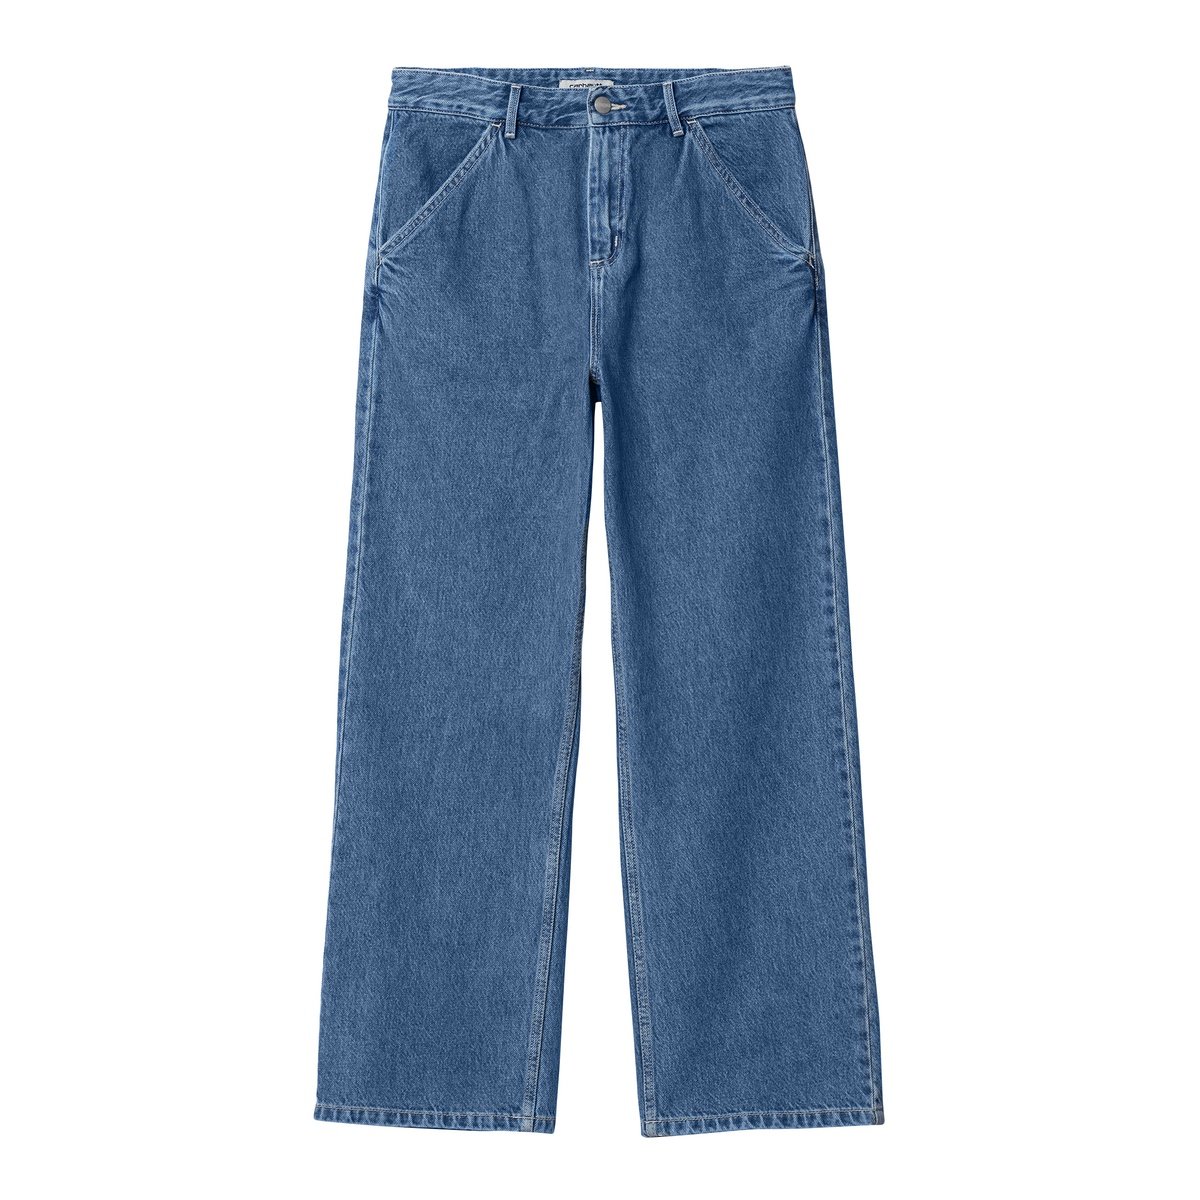 Simple Pant "Blue Stone Washed"